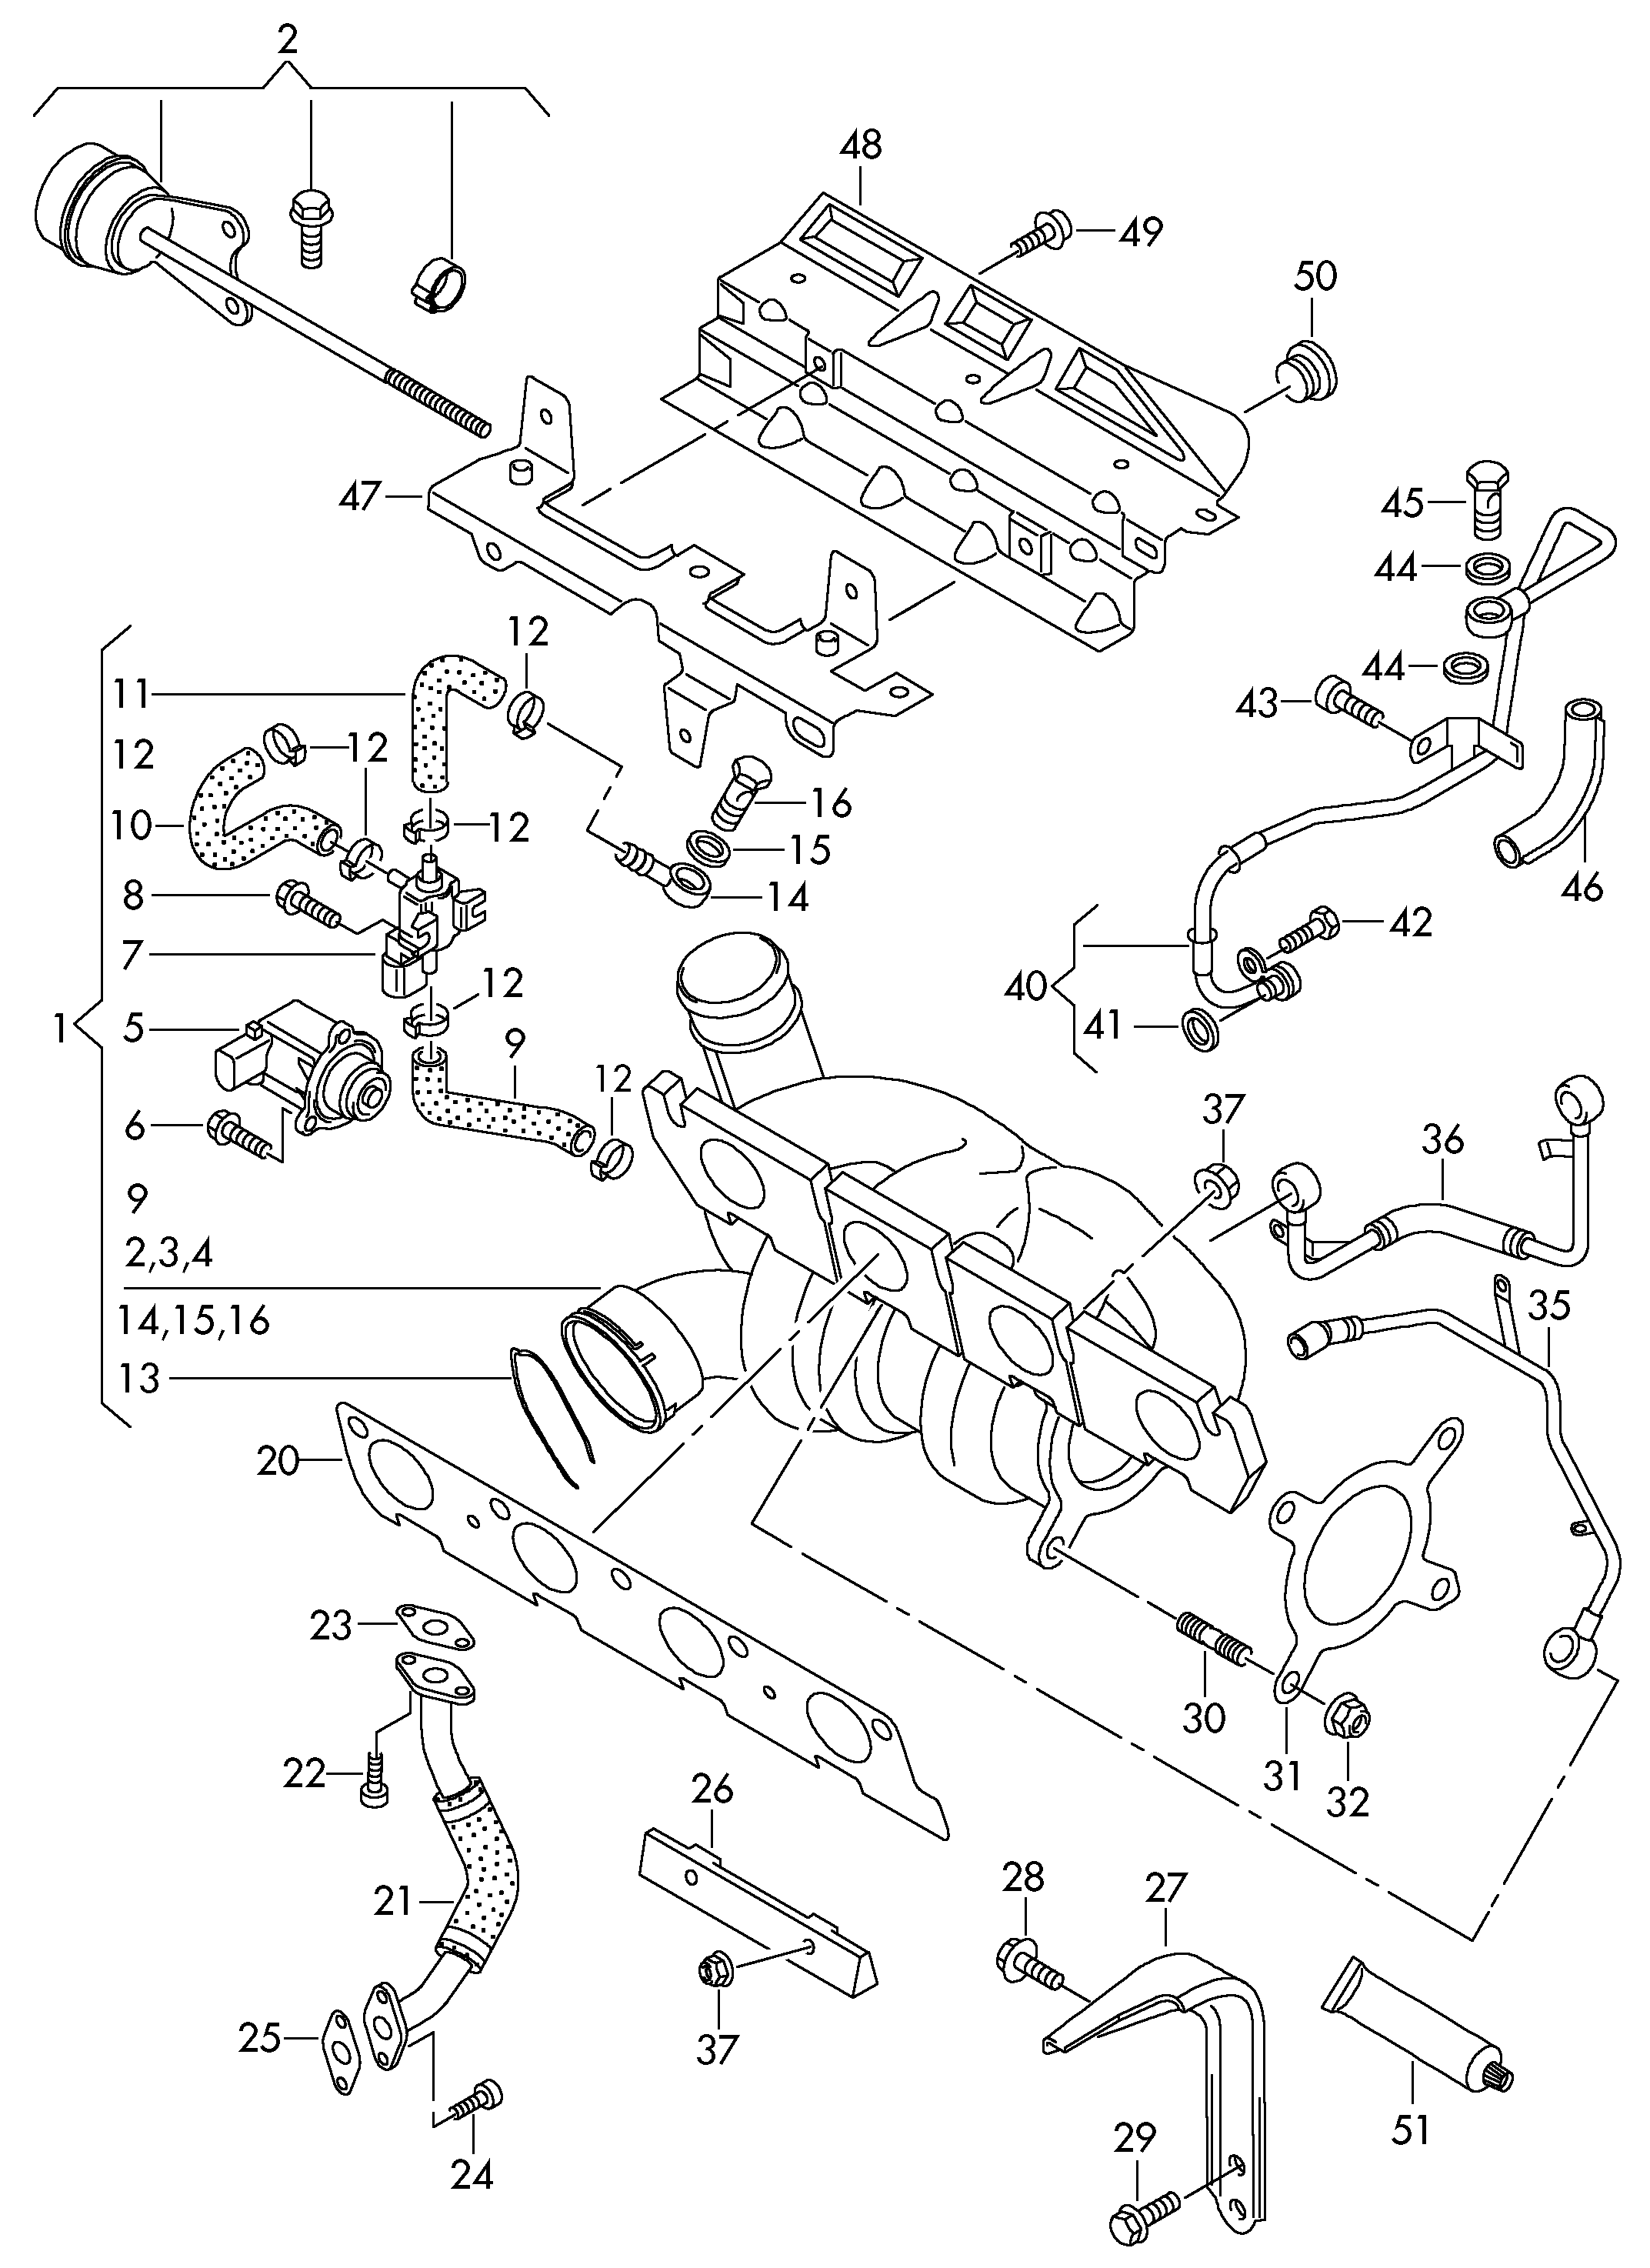 Exhaust manifold with turbo-<br>charger 2.0 Ltr. - Transporter - tr